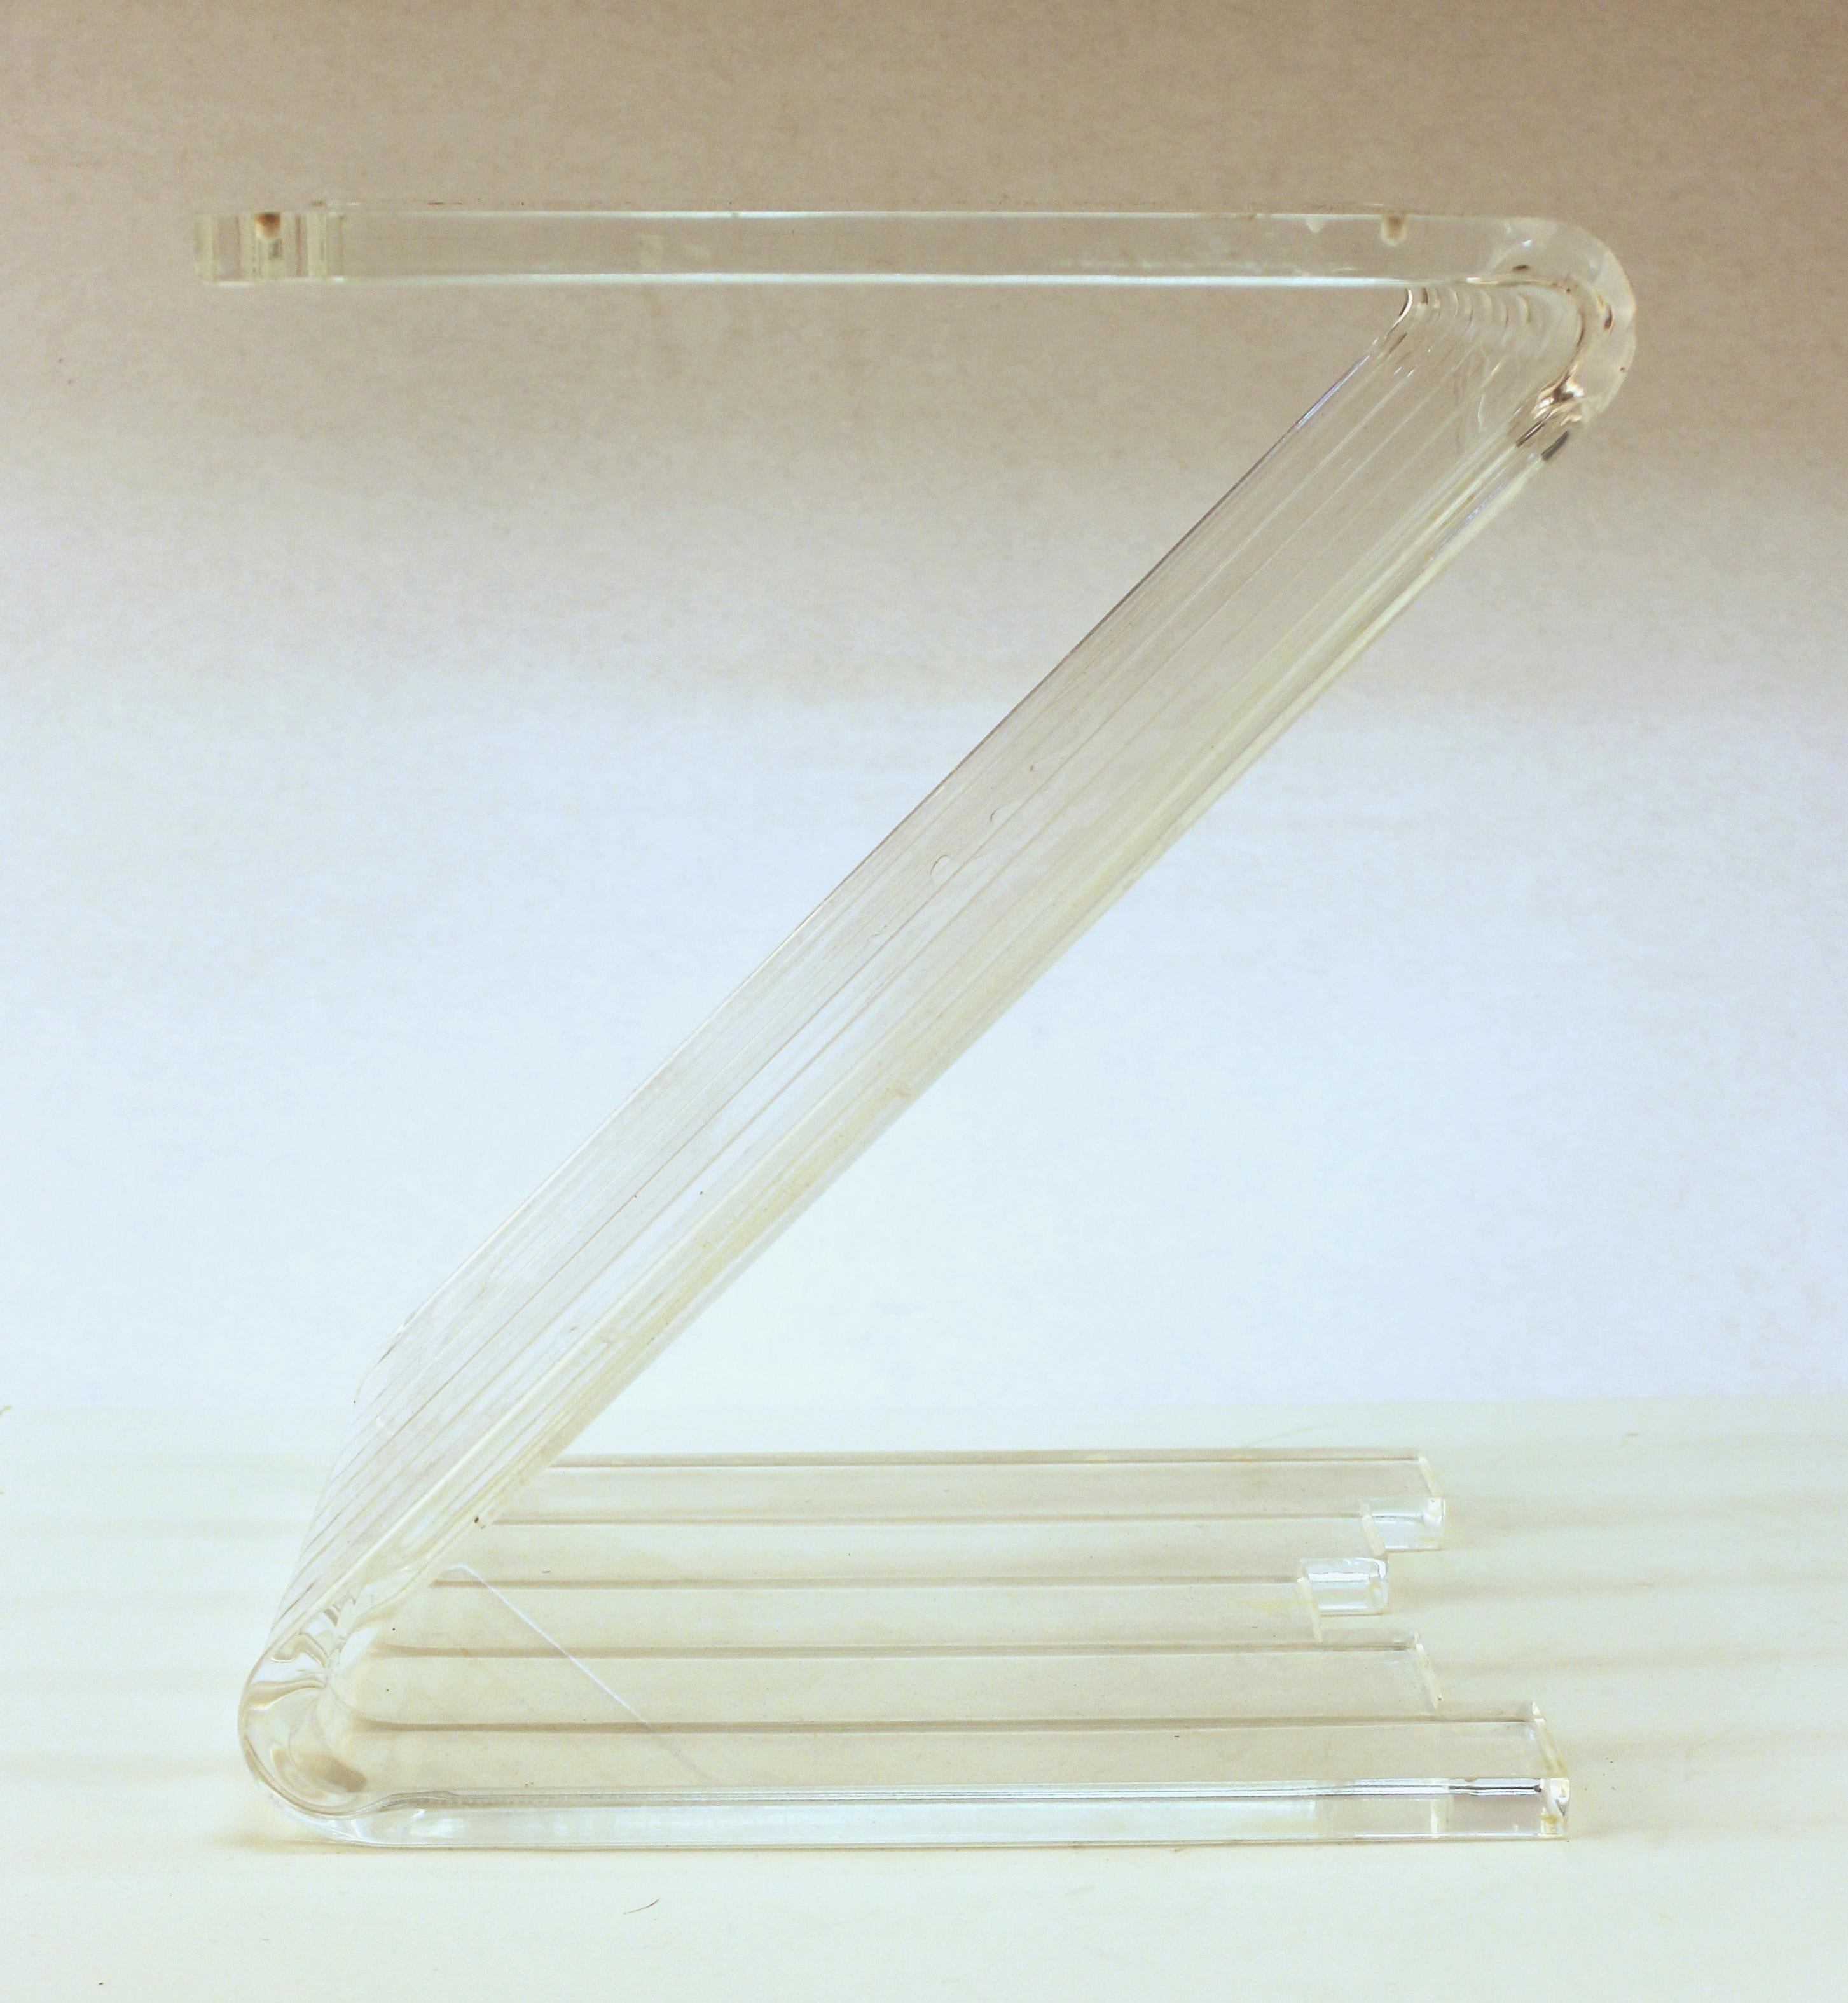 Modern Lucite side table designed in a Z shape, made in the United States during the 1970s. The piece is in good vintage condition and has age-appropriate scratches on the top and bottom of the Lucite.